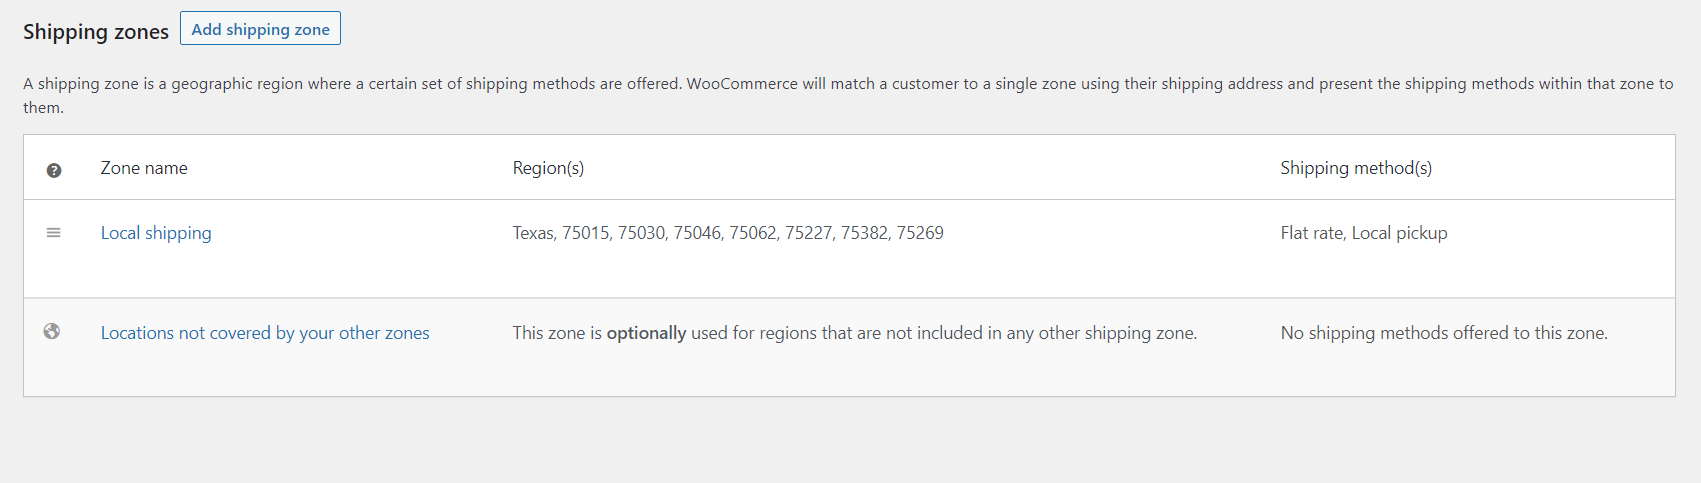 woocommerce multisite shipping